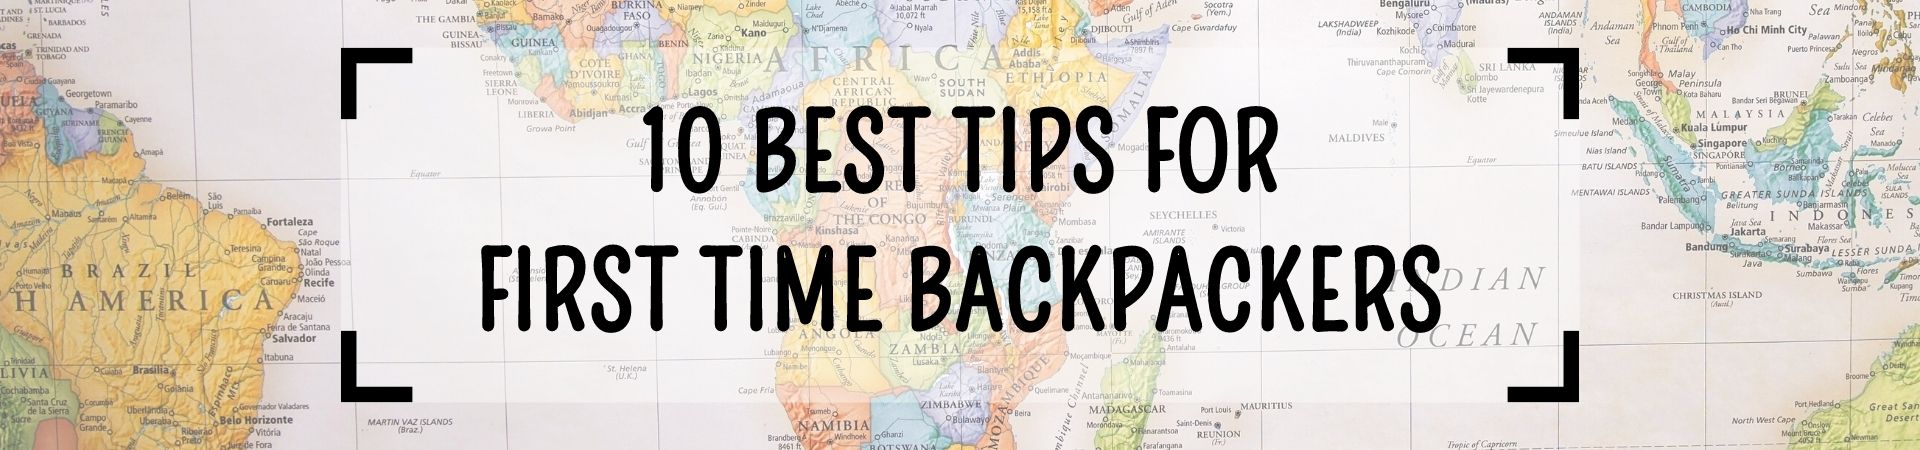 10 Best Tips for First Time Backpackers